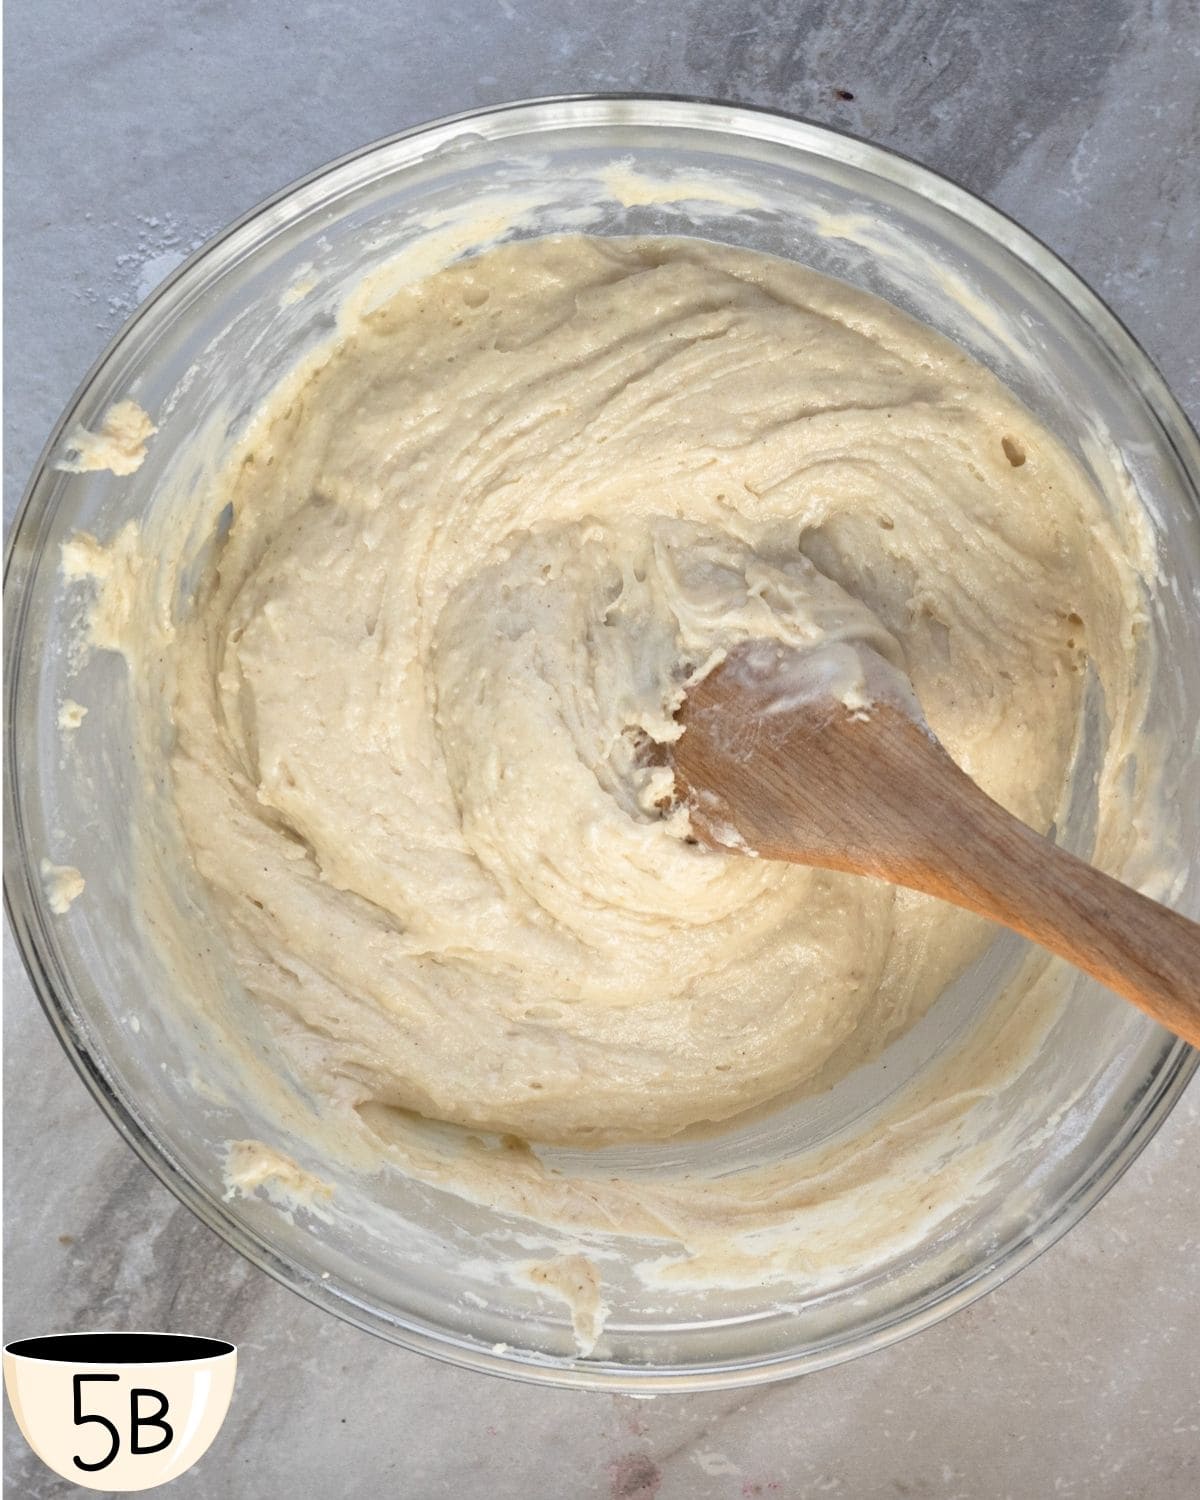 Gluten free chocolate chip muffin batter in the glass bowl after being mixed, showing a smooth, creamy consistency with the wooden spoon still in the bowl.